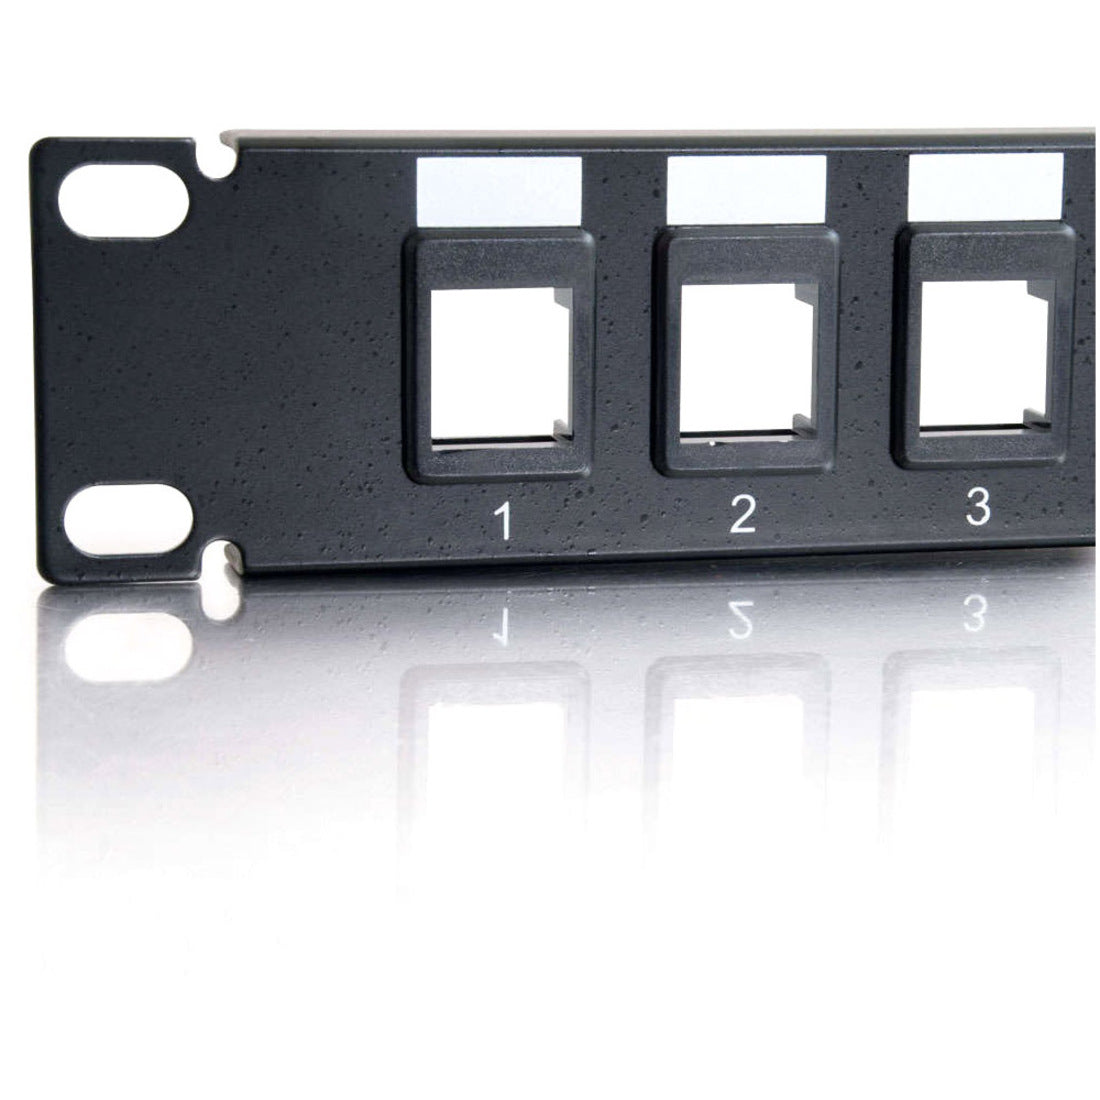 C2G 03858 16 port Blank Keystone/Multimedia Patch Panel, Perfect configurable solution for setting up a network